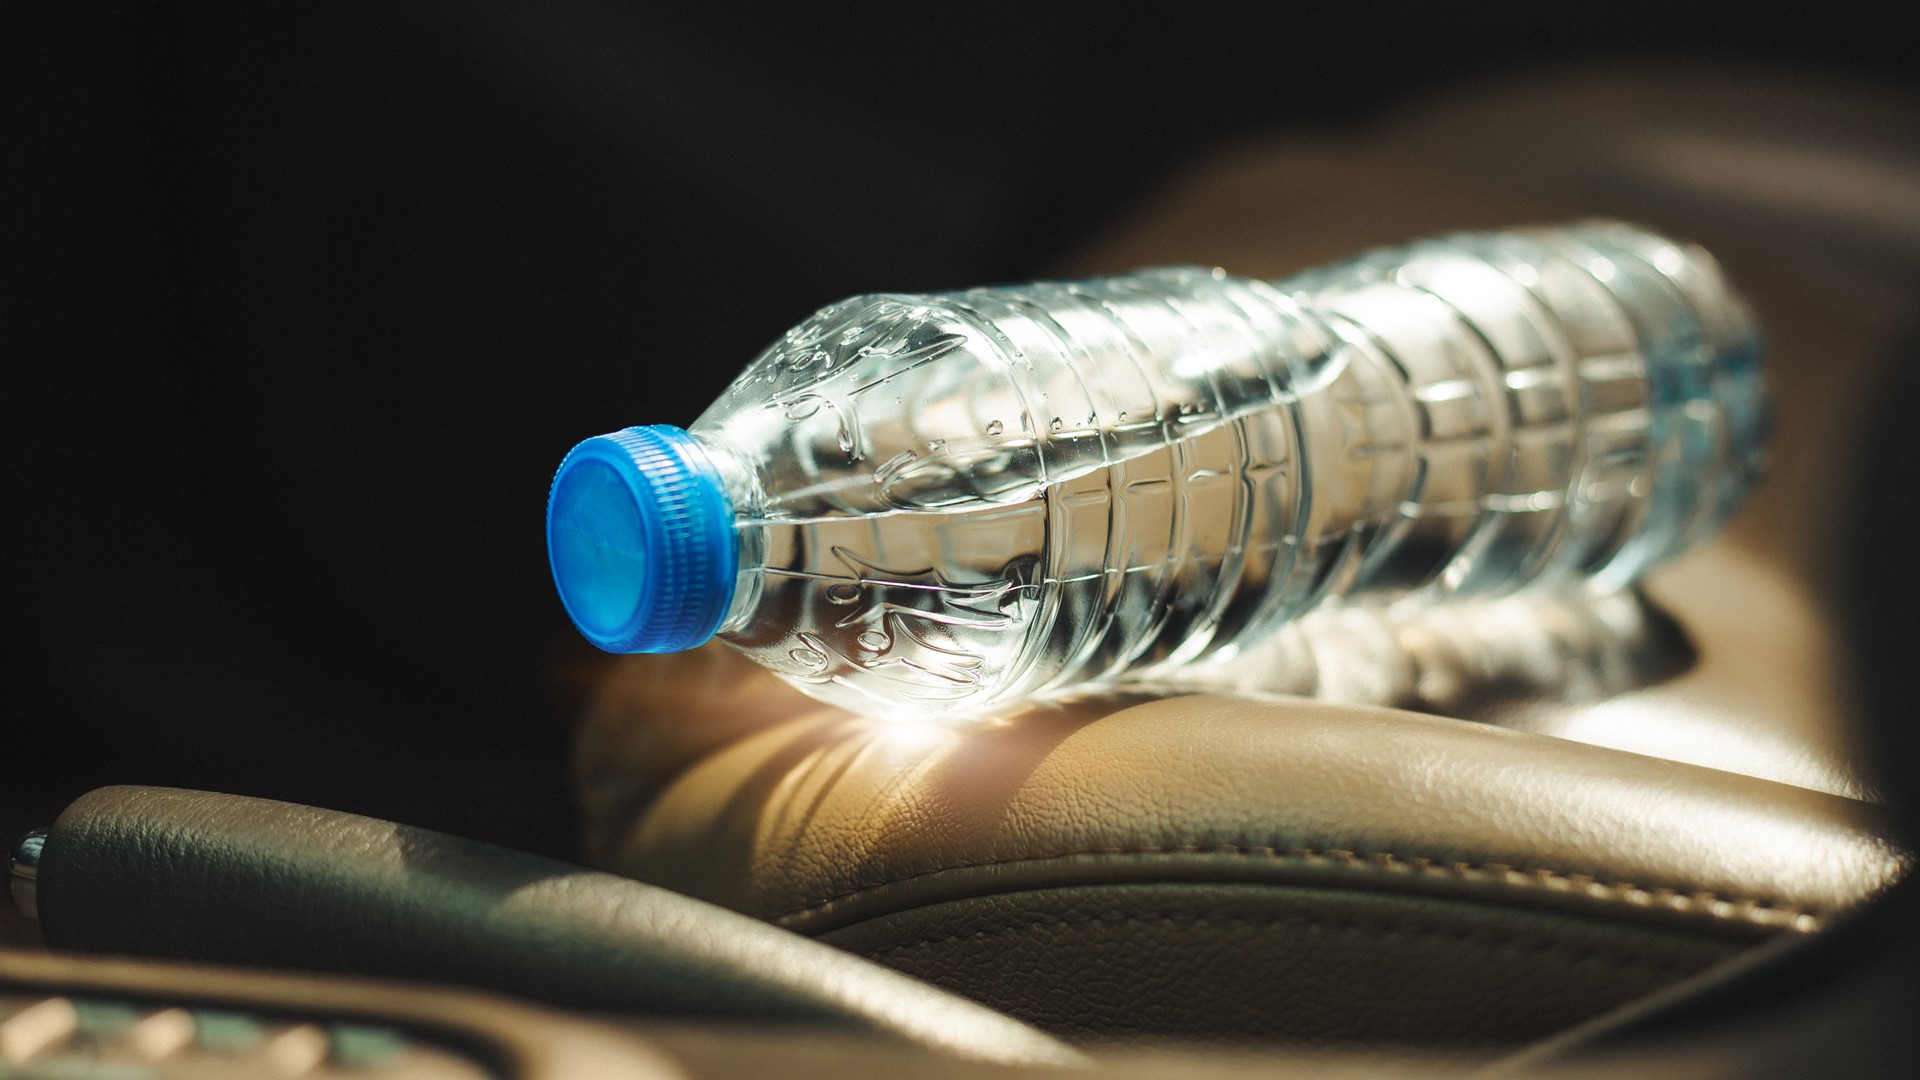 During the long, hot summer months in the Lone Star State, drivers have wondered water bottles could start a fire in a hot car? Chris Rogers sheds light on the online claim.